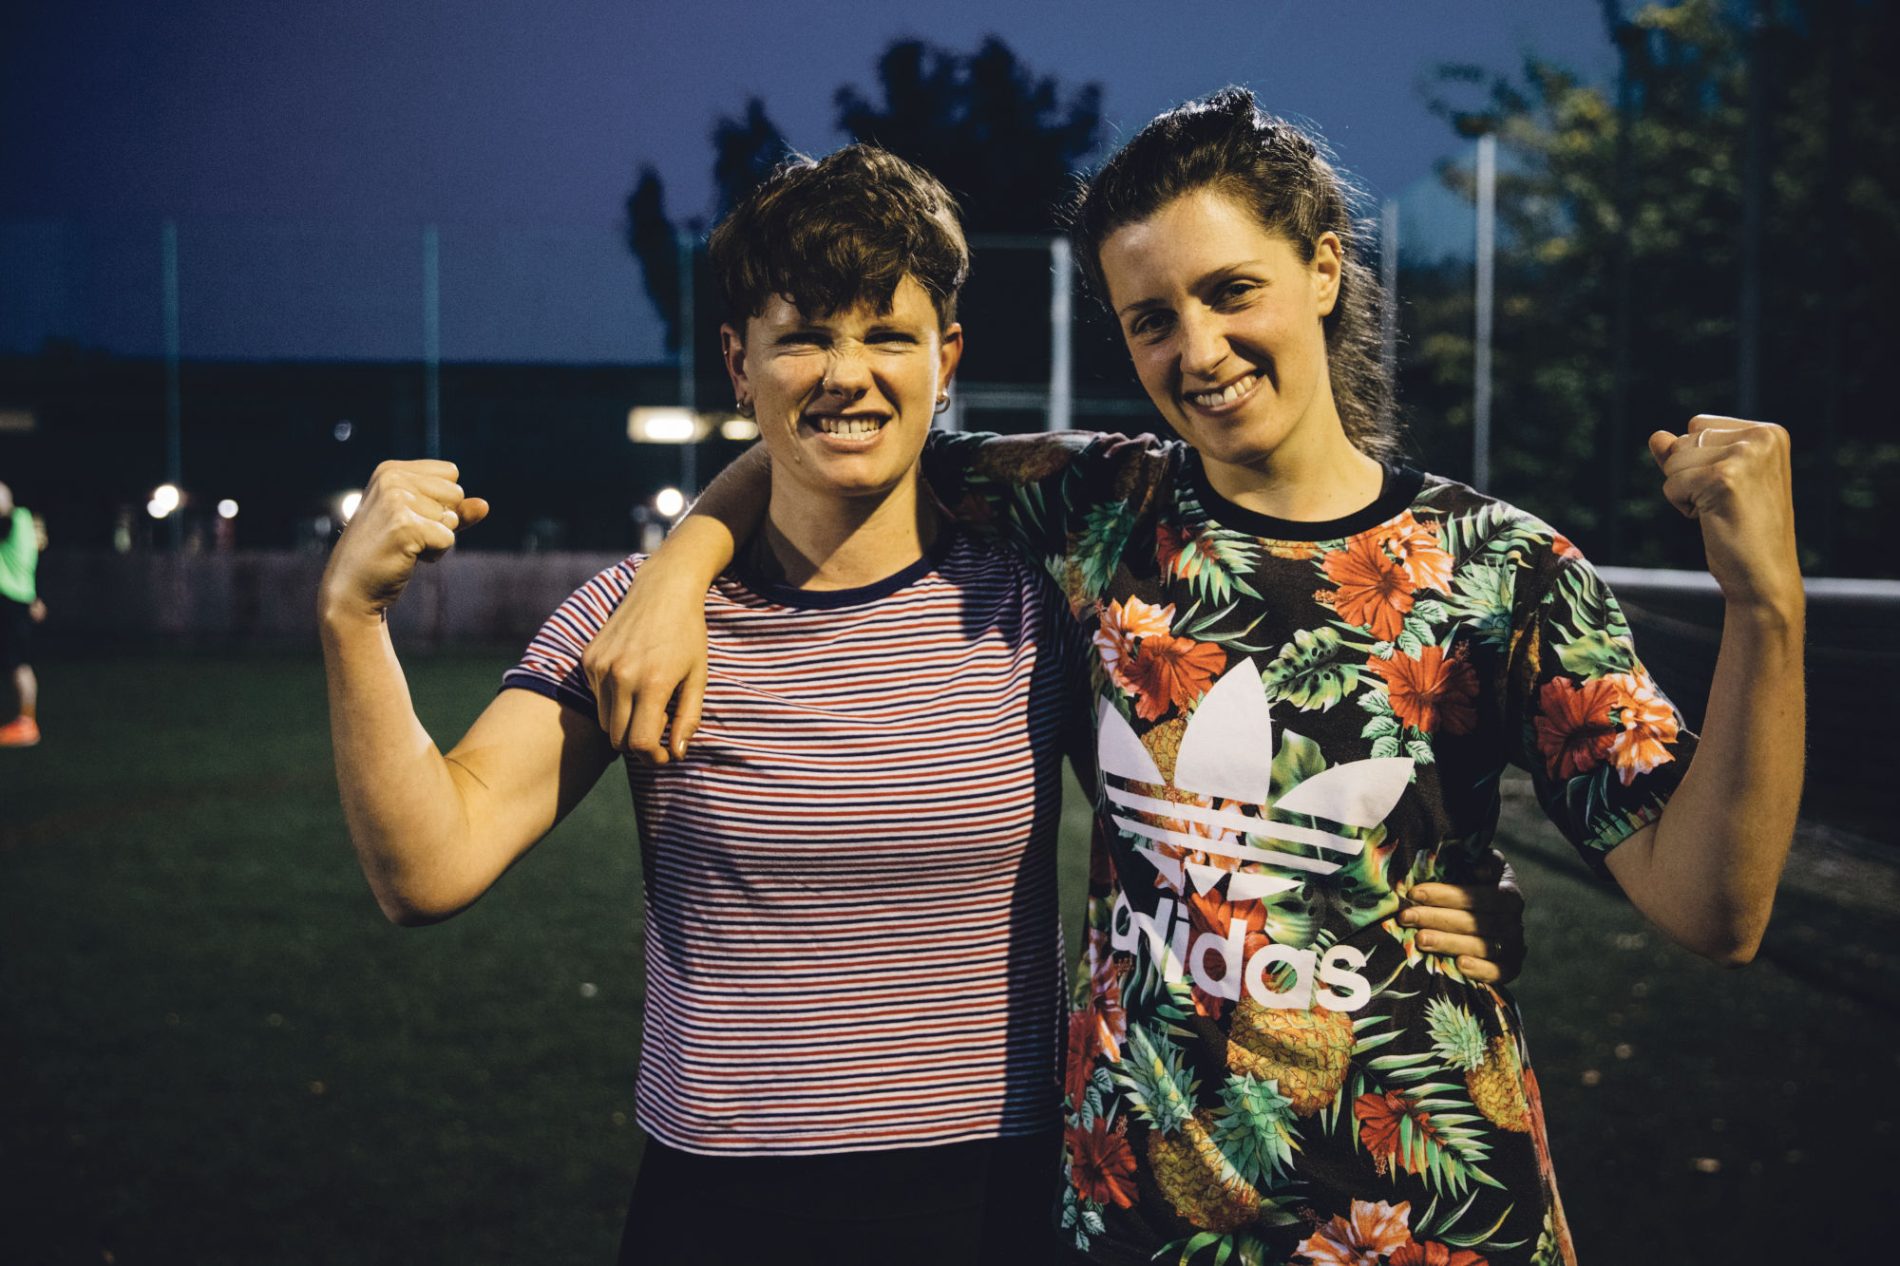 Two women celebrate together and punch the air after the football match.